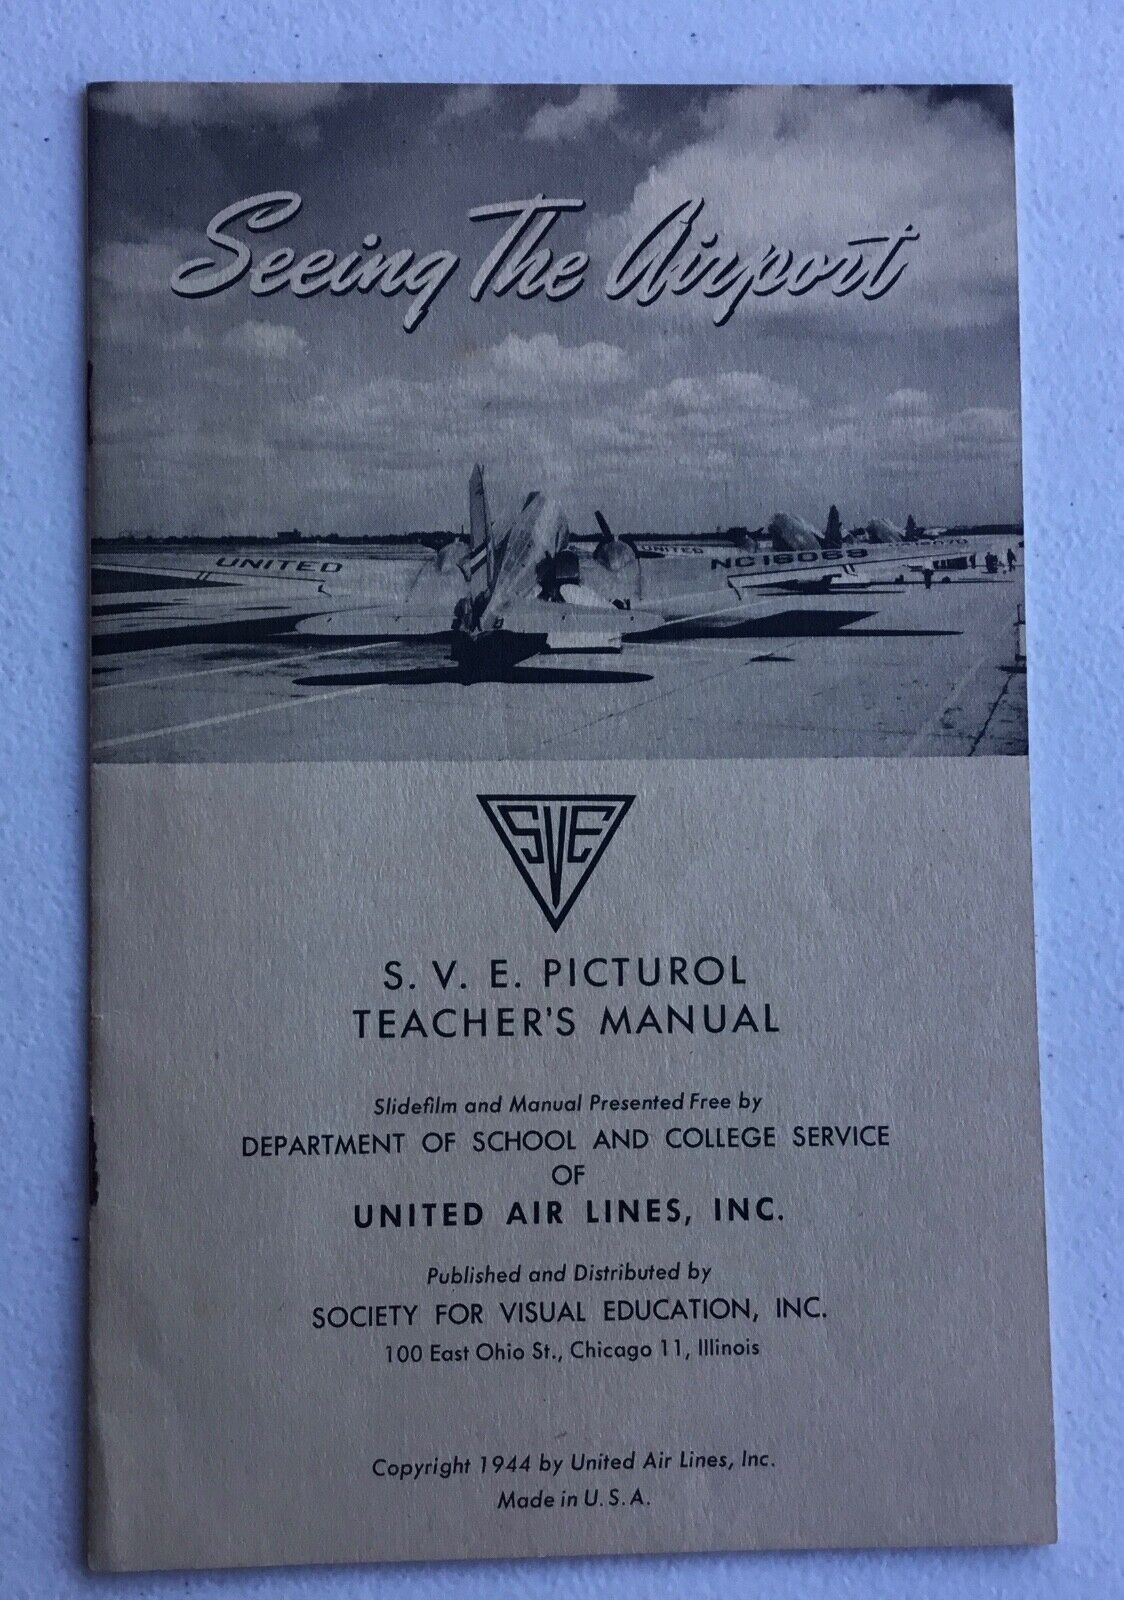 Vintage 1940s United Airlines Brochure “Seeing the Airport” School Story Manual 